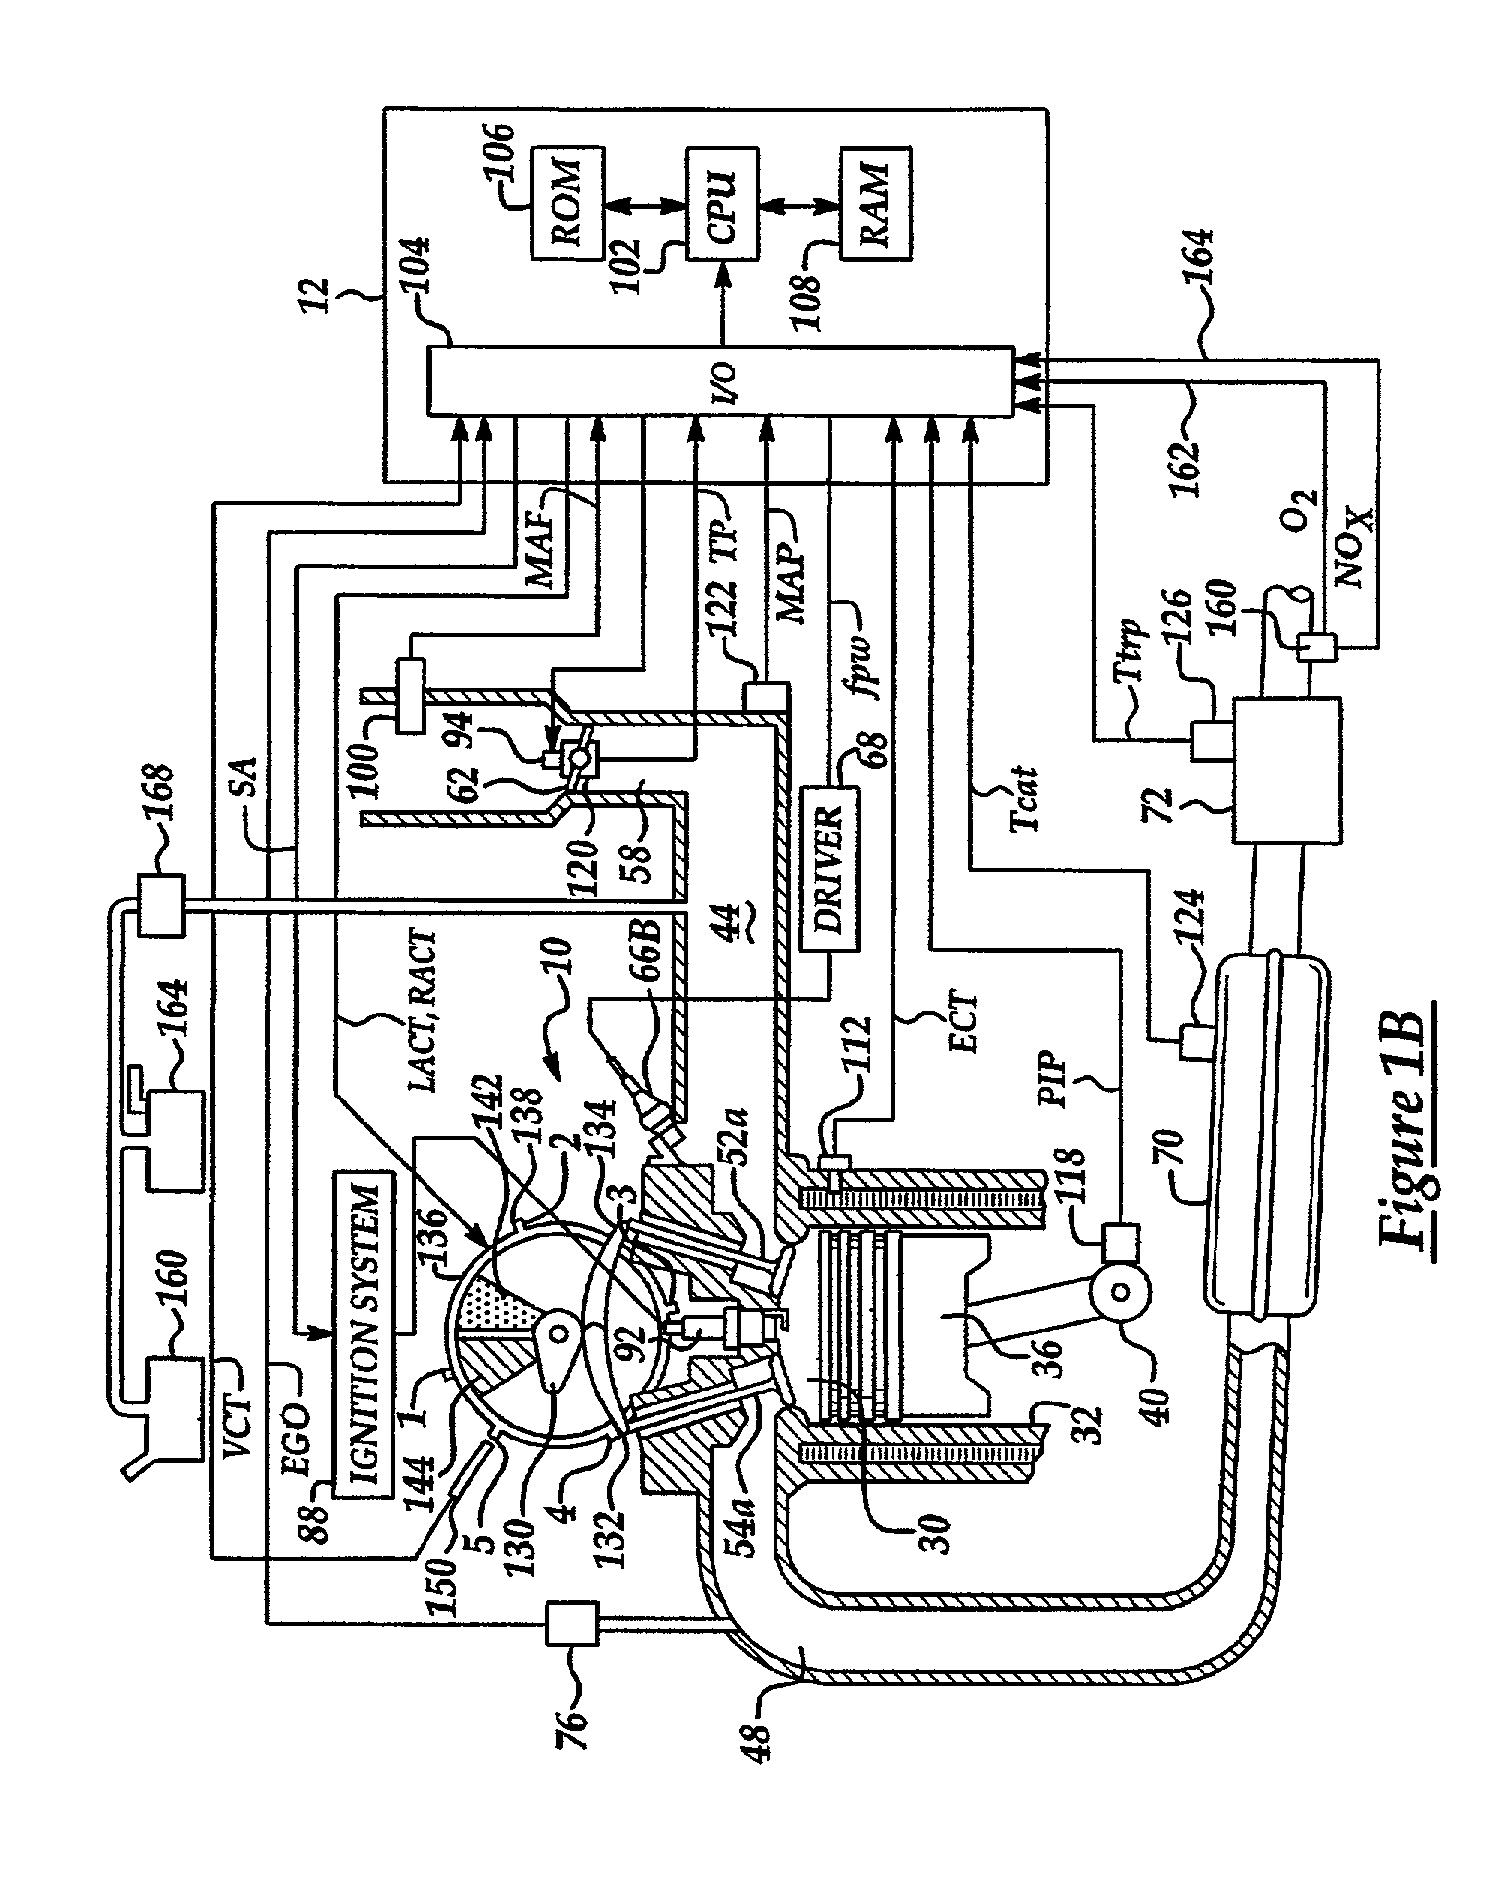 Idle speed control for lean burn engine with variable-displacement-like characteristic